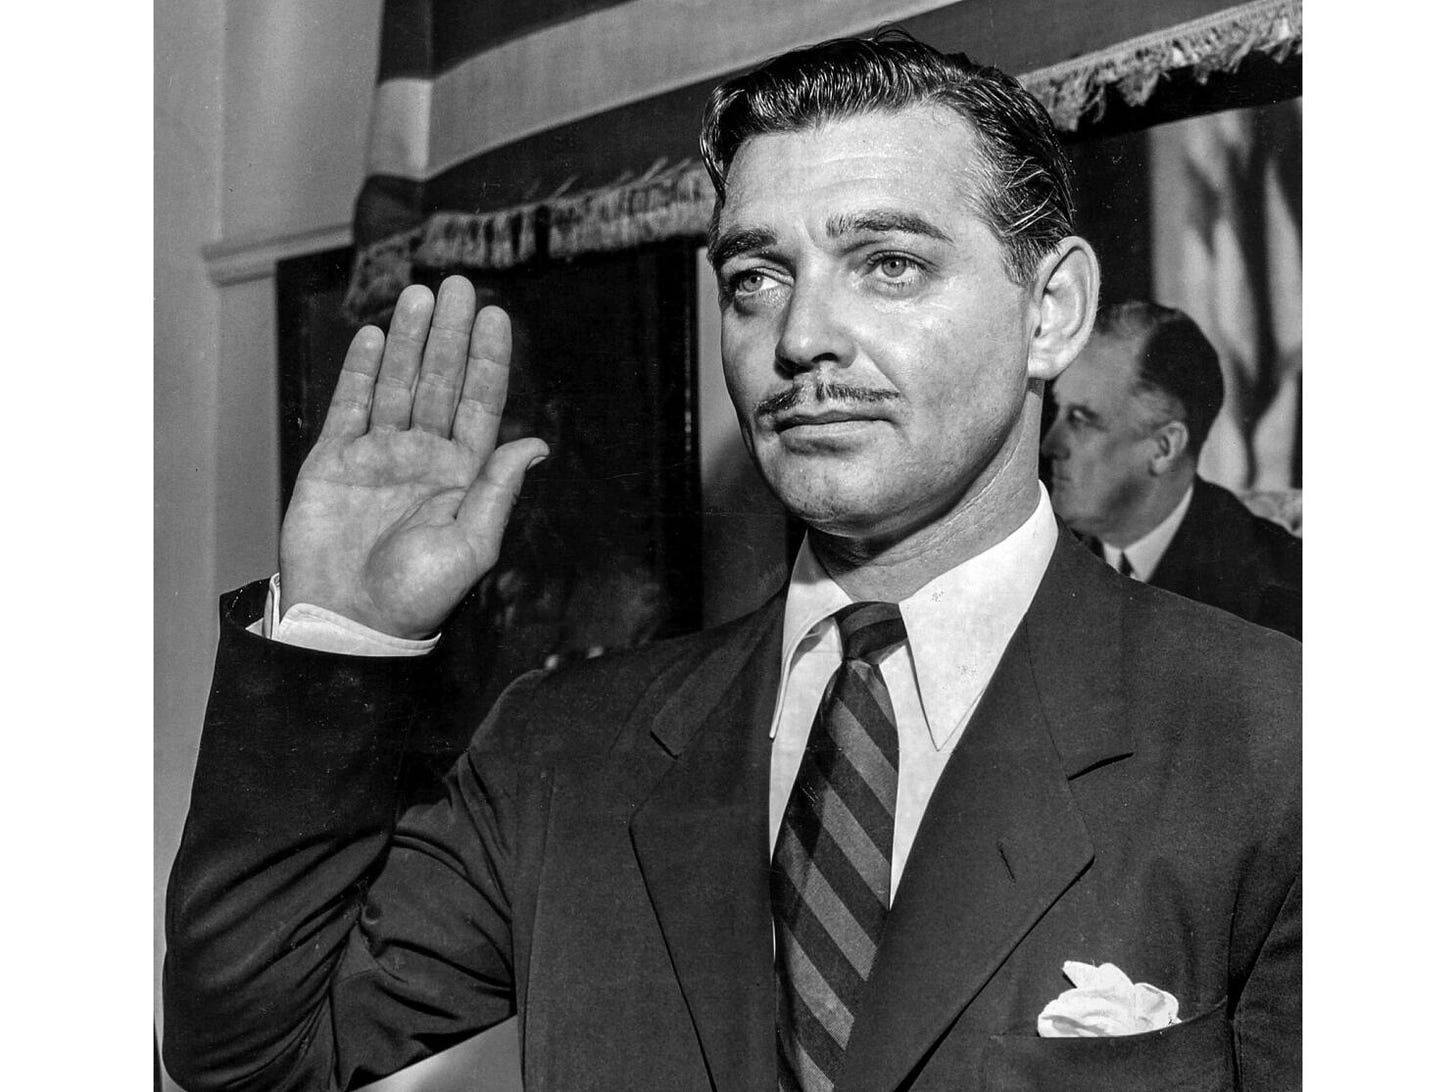 From the Archives: Clark Gable joins the Army - Los Angeles Times